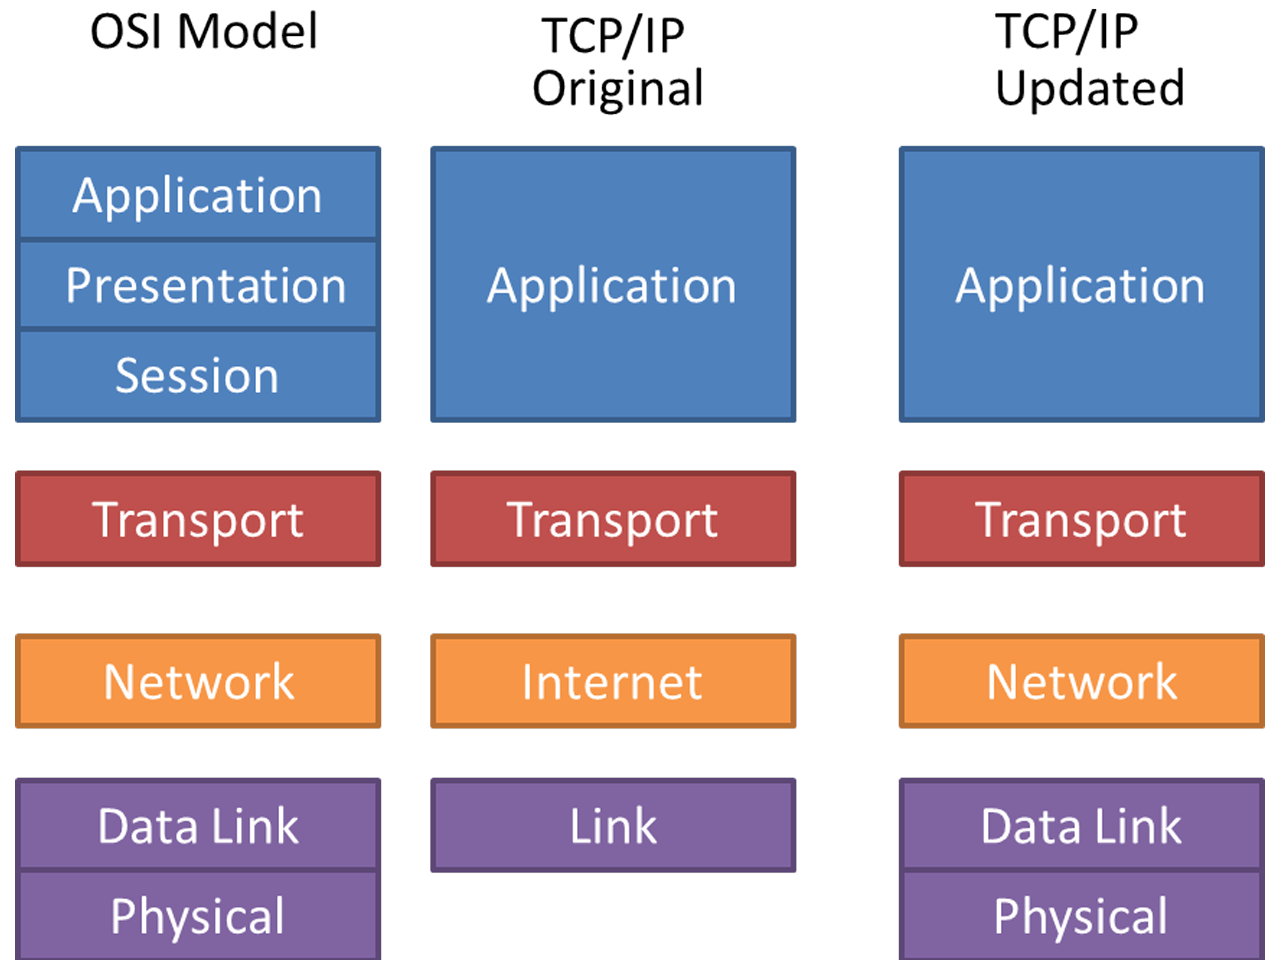 https://velog.velcdn.com/images/amuse/post/c8714fe2-f8a4-4670-8c4e-71c888987e7f/similarities-and-differences-between-osi-and-tcp-ip-model.png